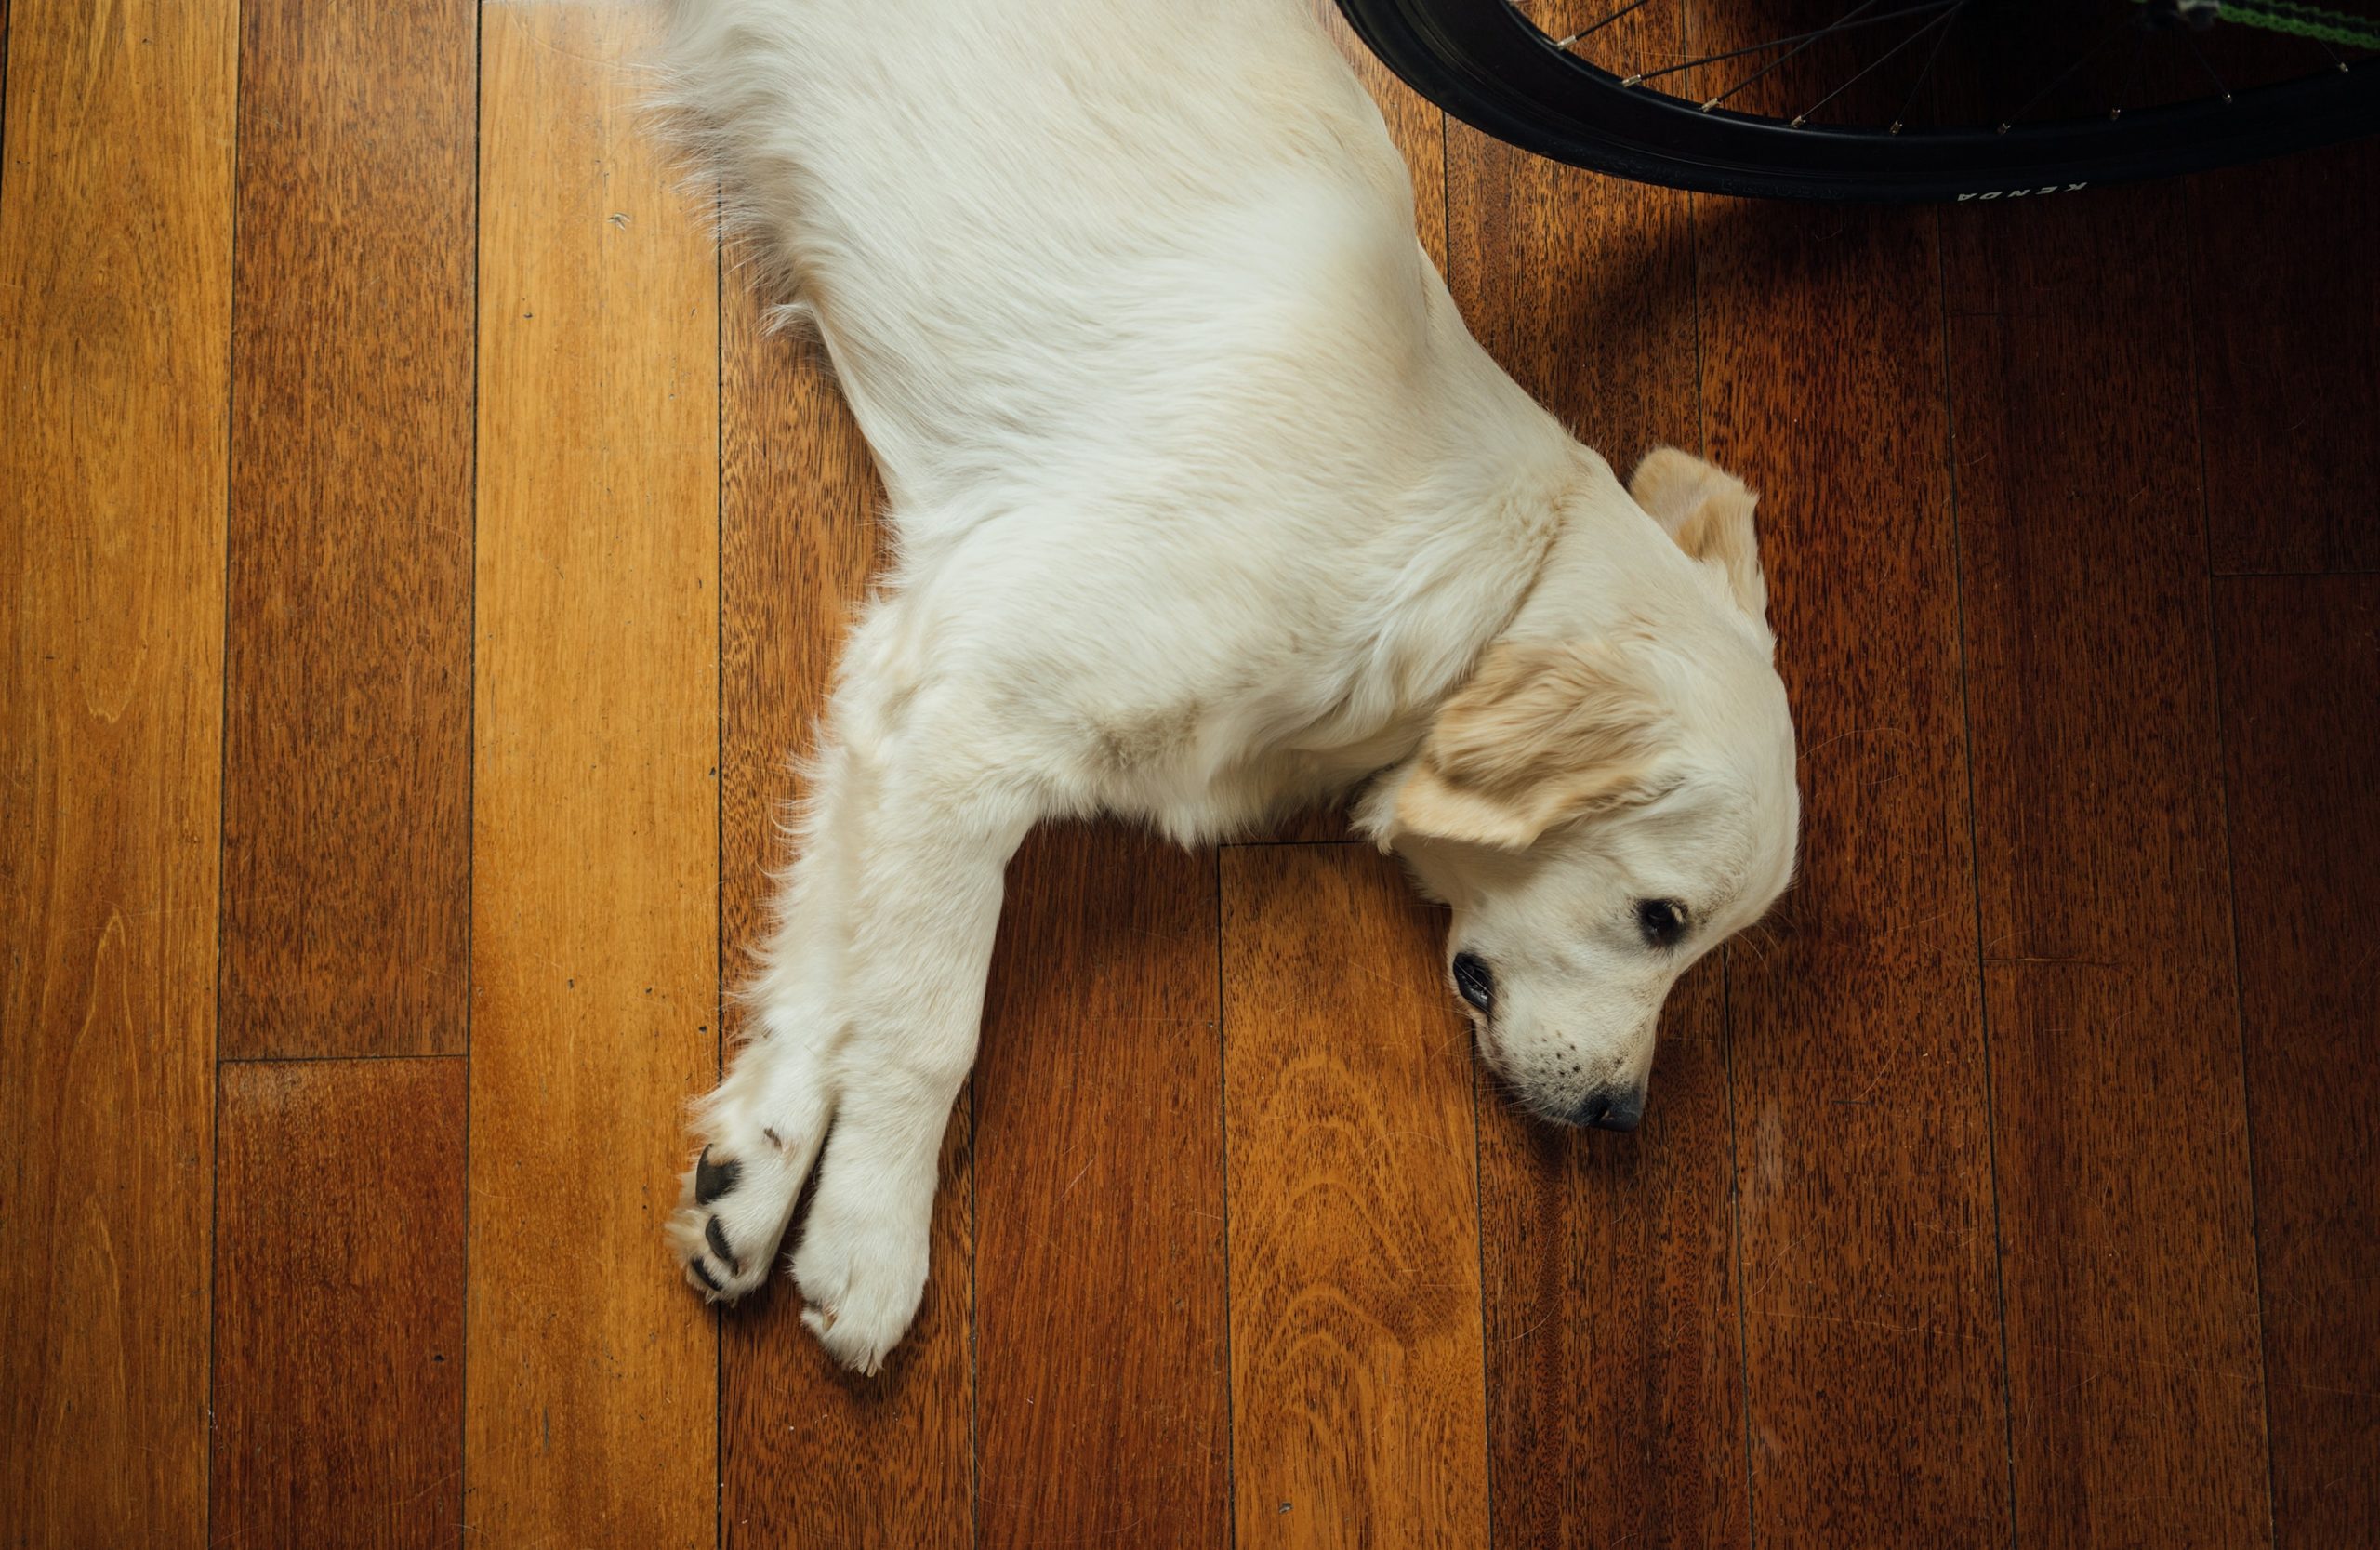 Best Wooden Floor For Cats And Dogs, How To Protect Laminate Floors From Dog Scratches